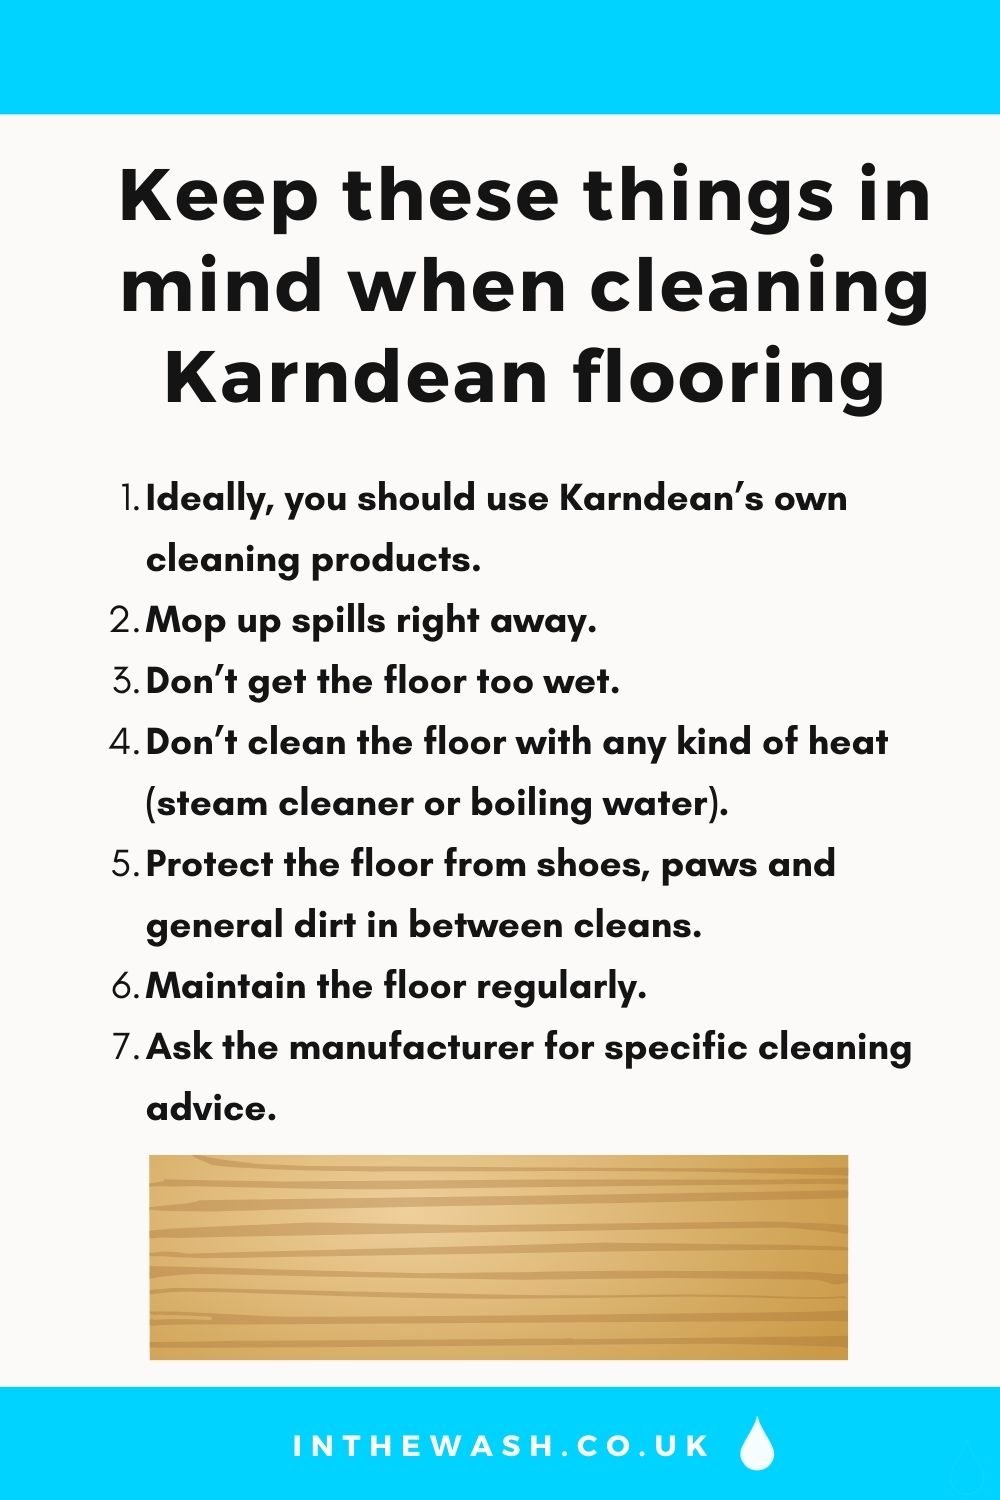 Things to keep in mind when cleaning Karndean flooring